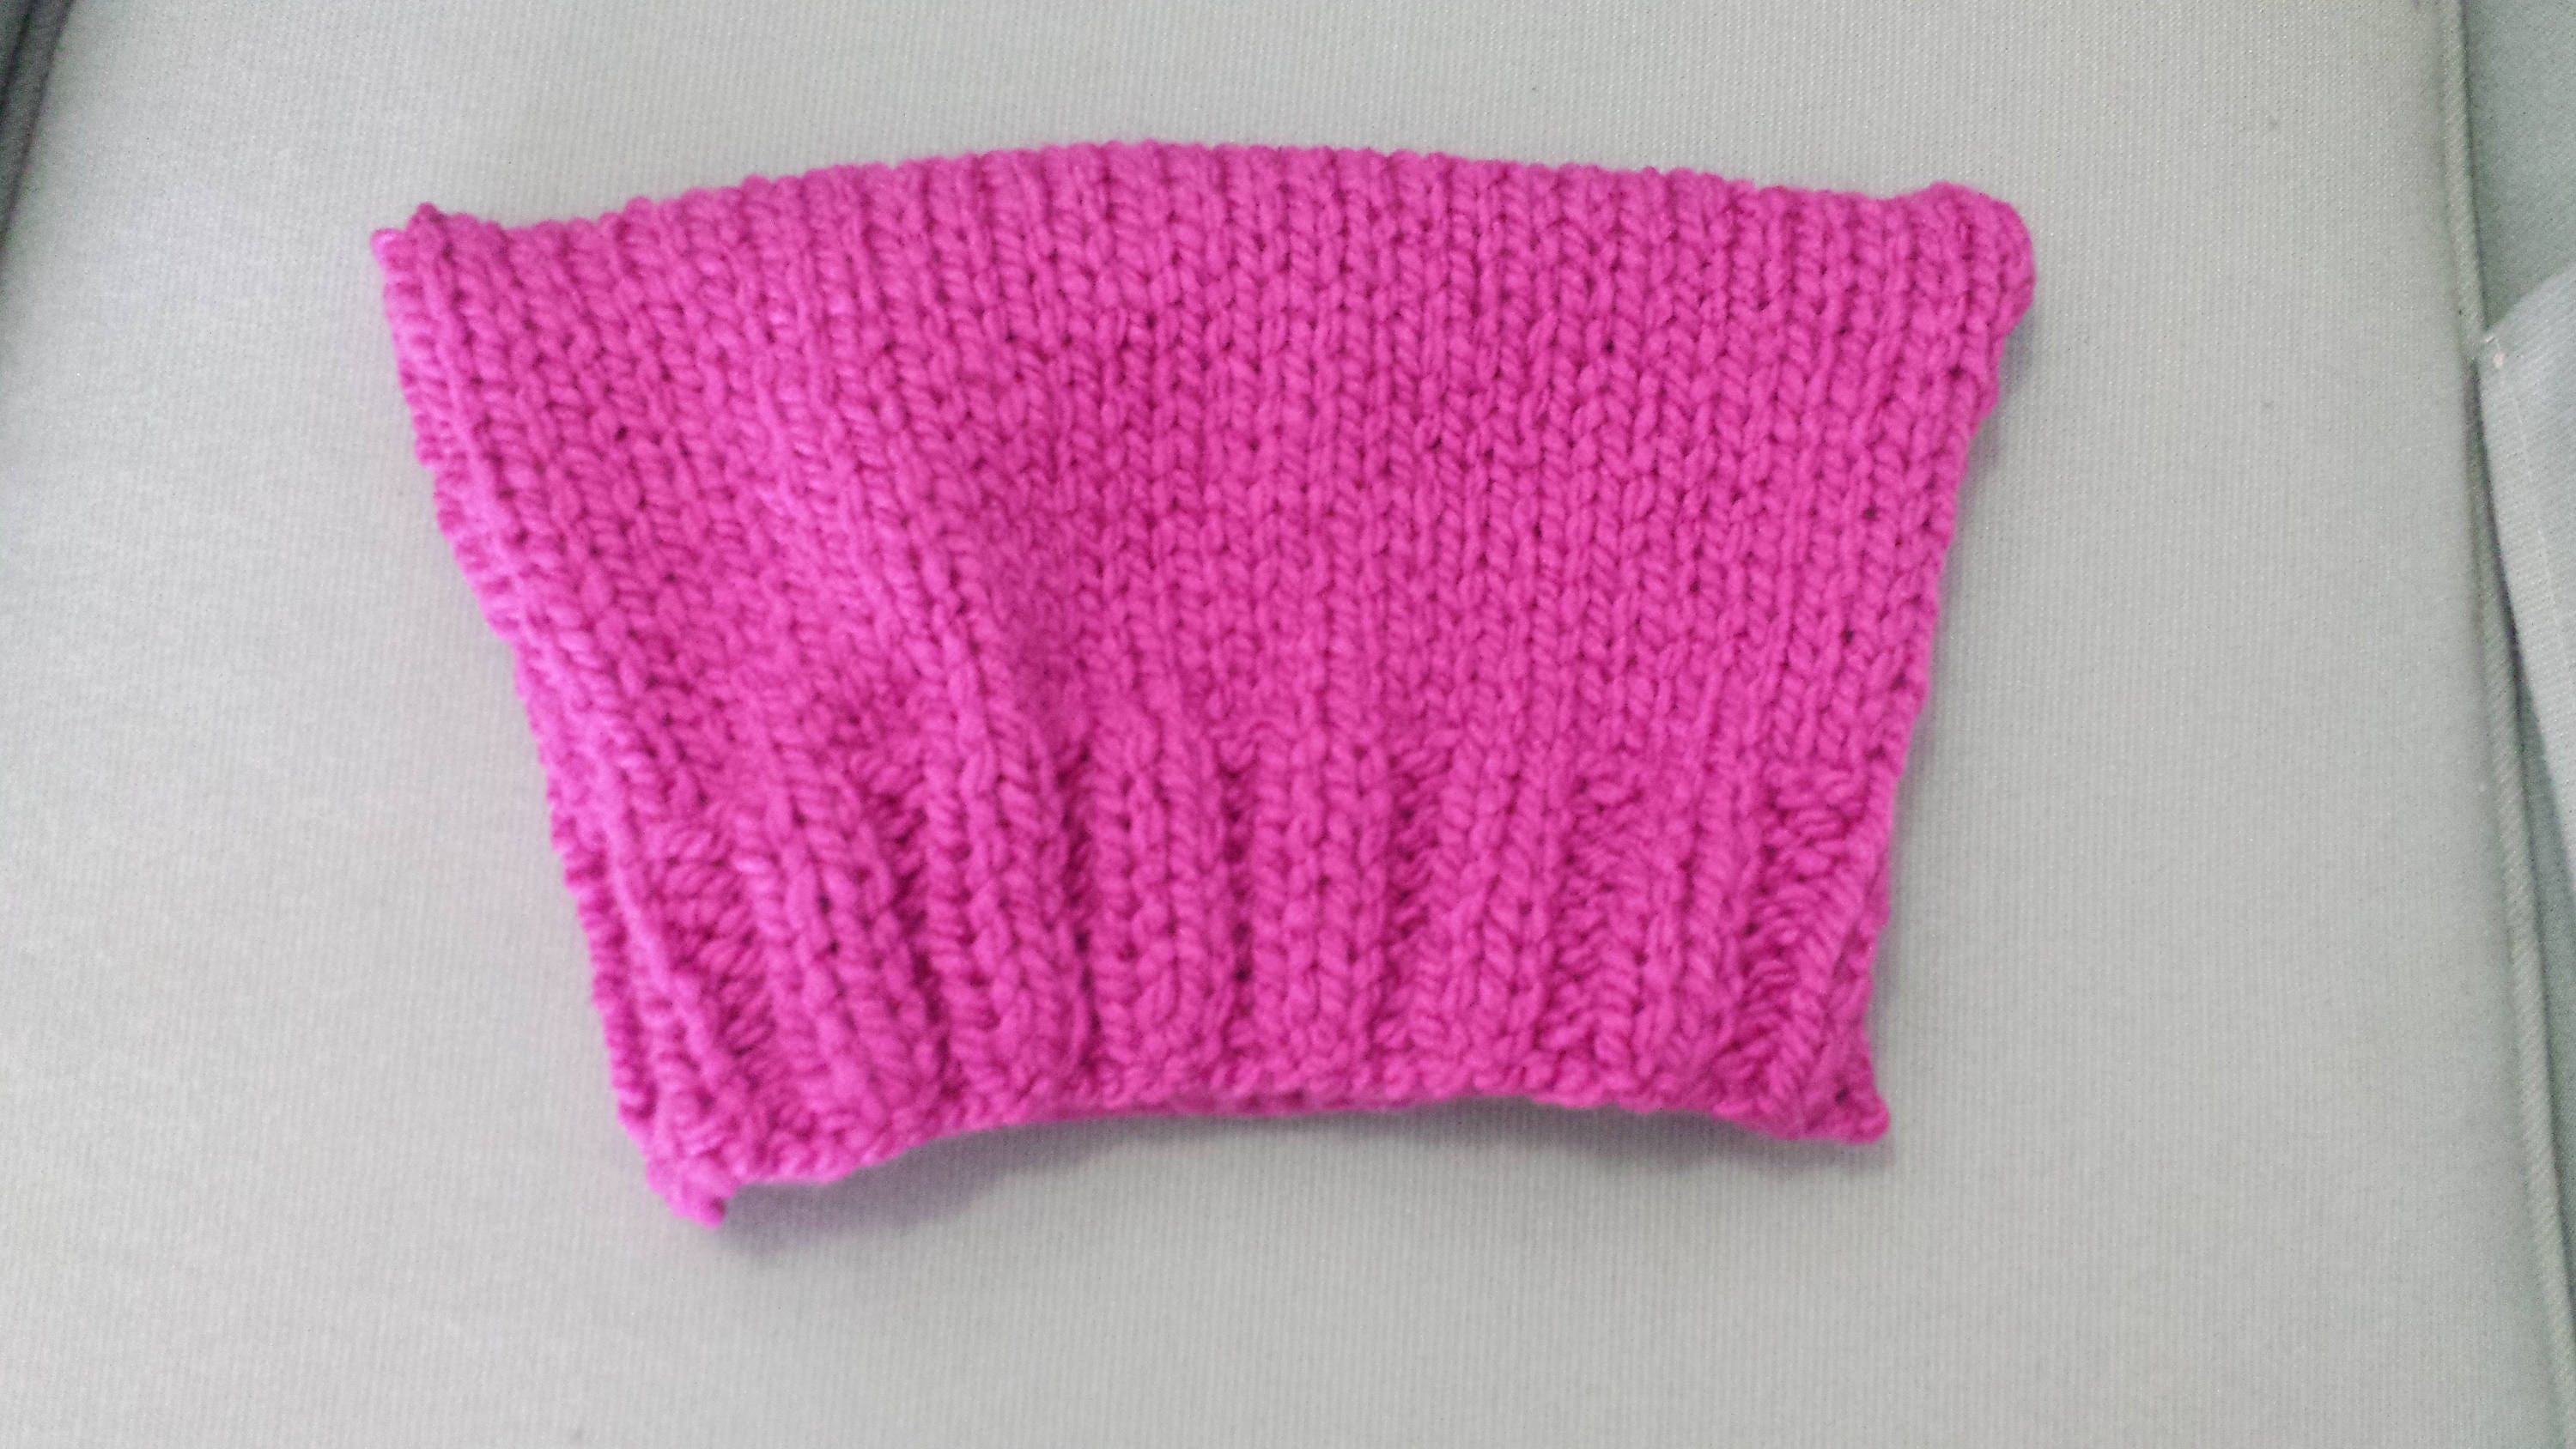 Pink Pussyhat Pussyhat Project Women's March Feminist - Etsy